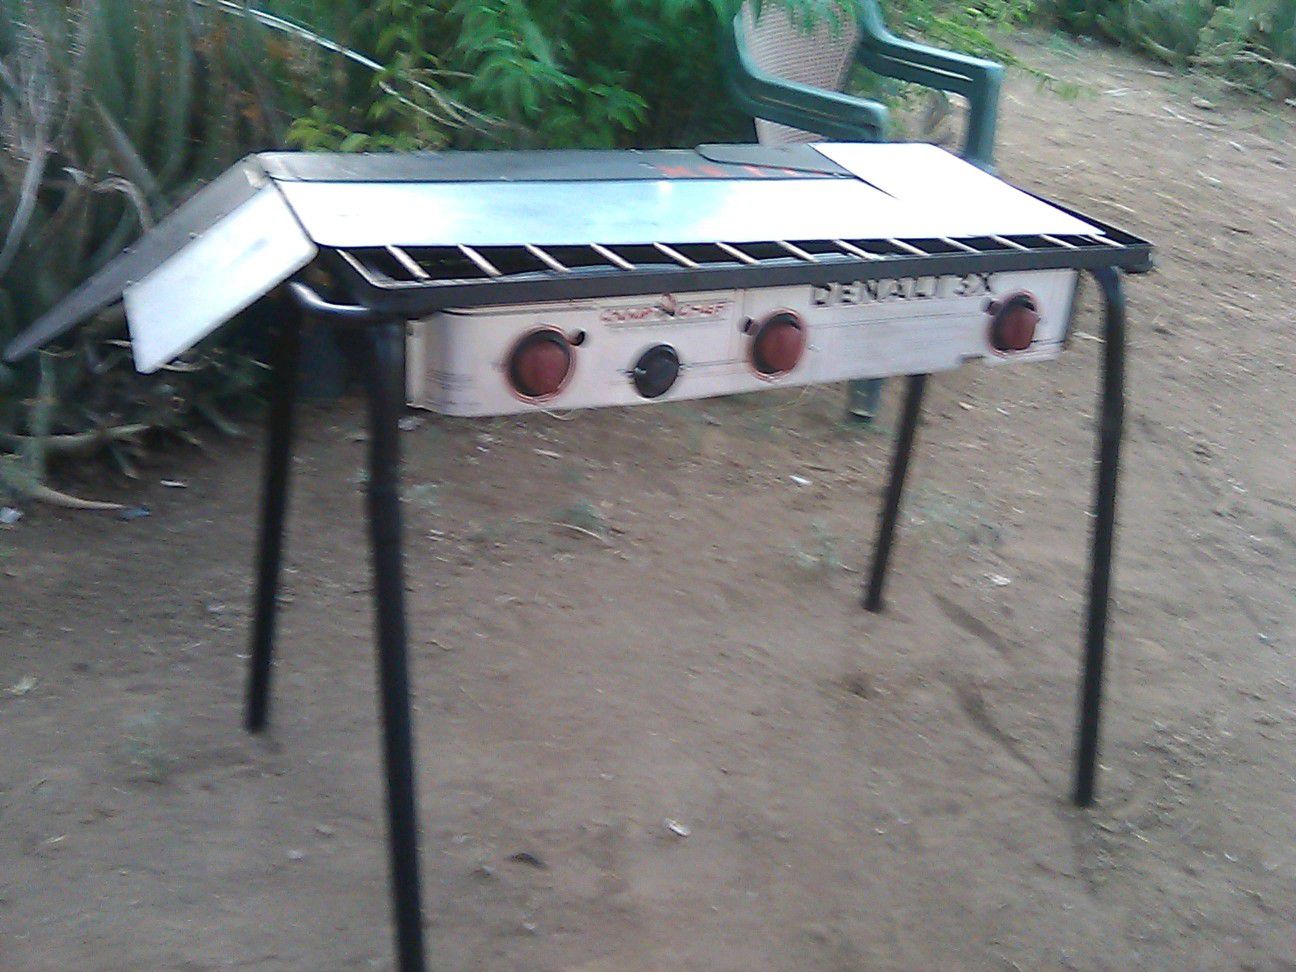 Camp n cheif GRILL 100$